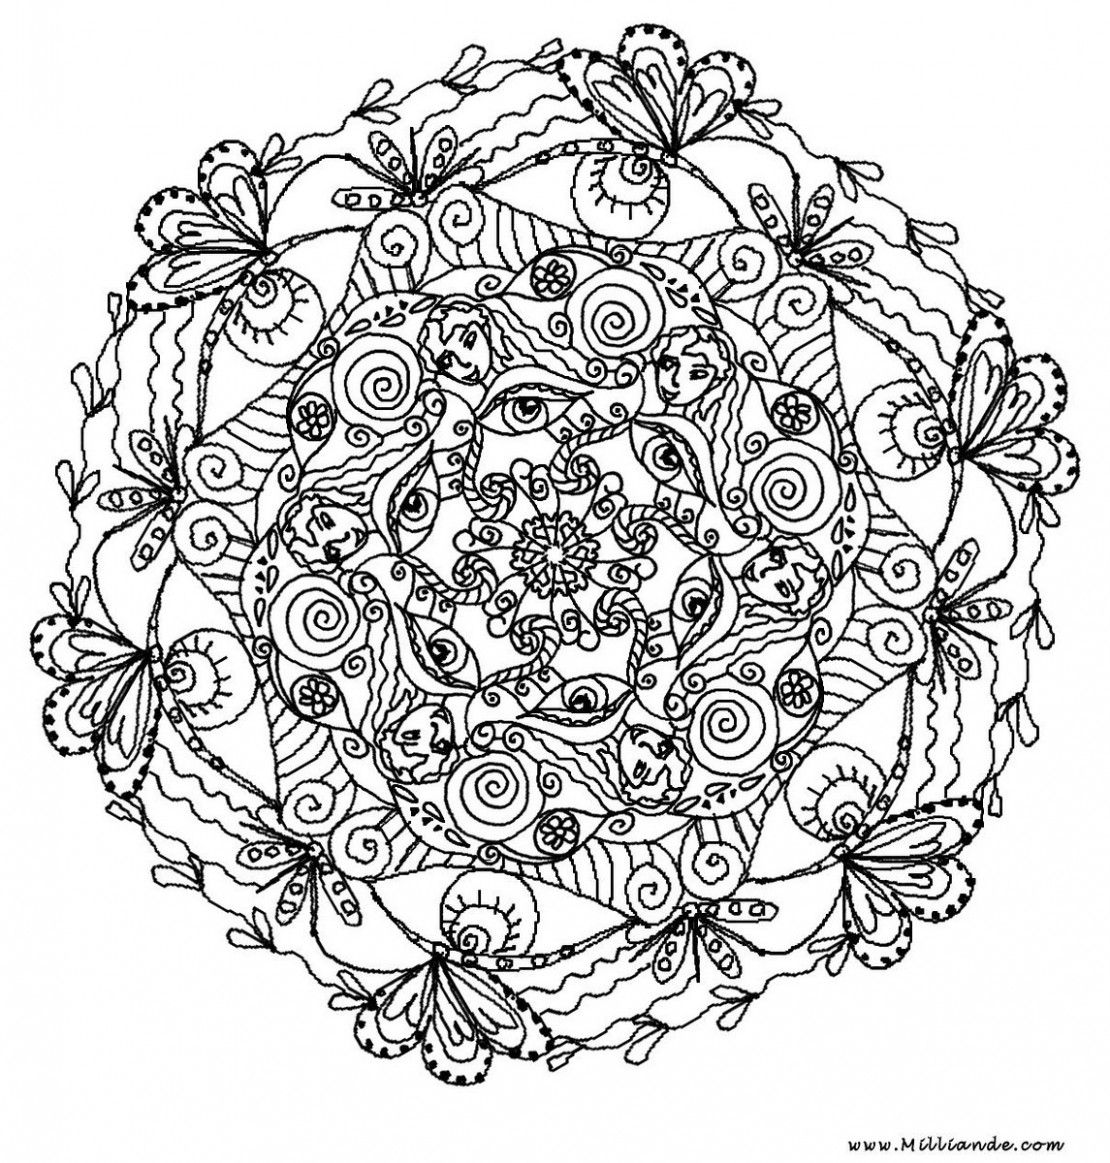 Cool Coloring Pages Printables - High Quality Coloring Pages